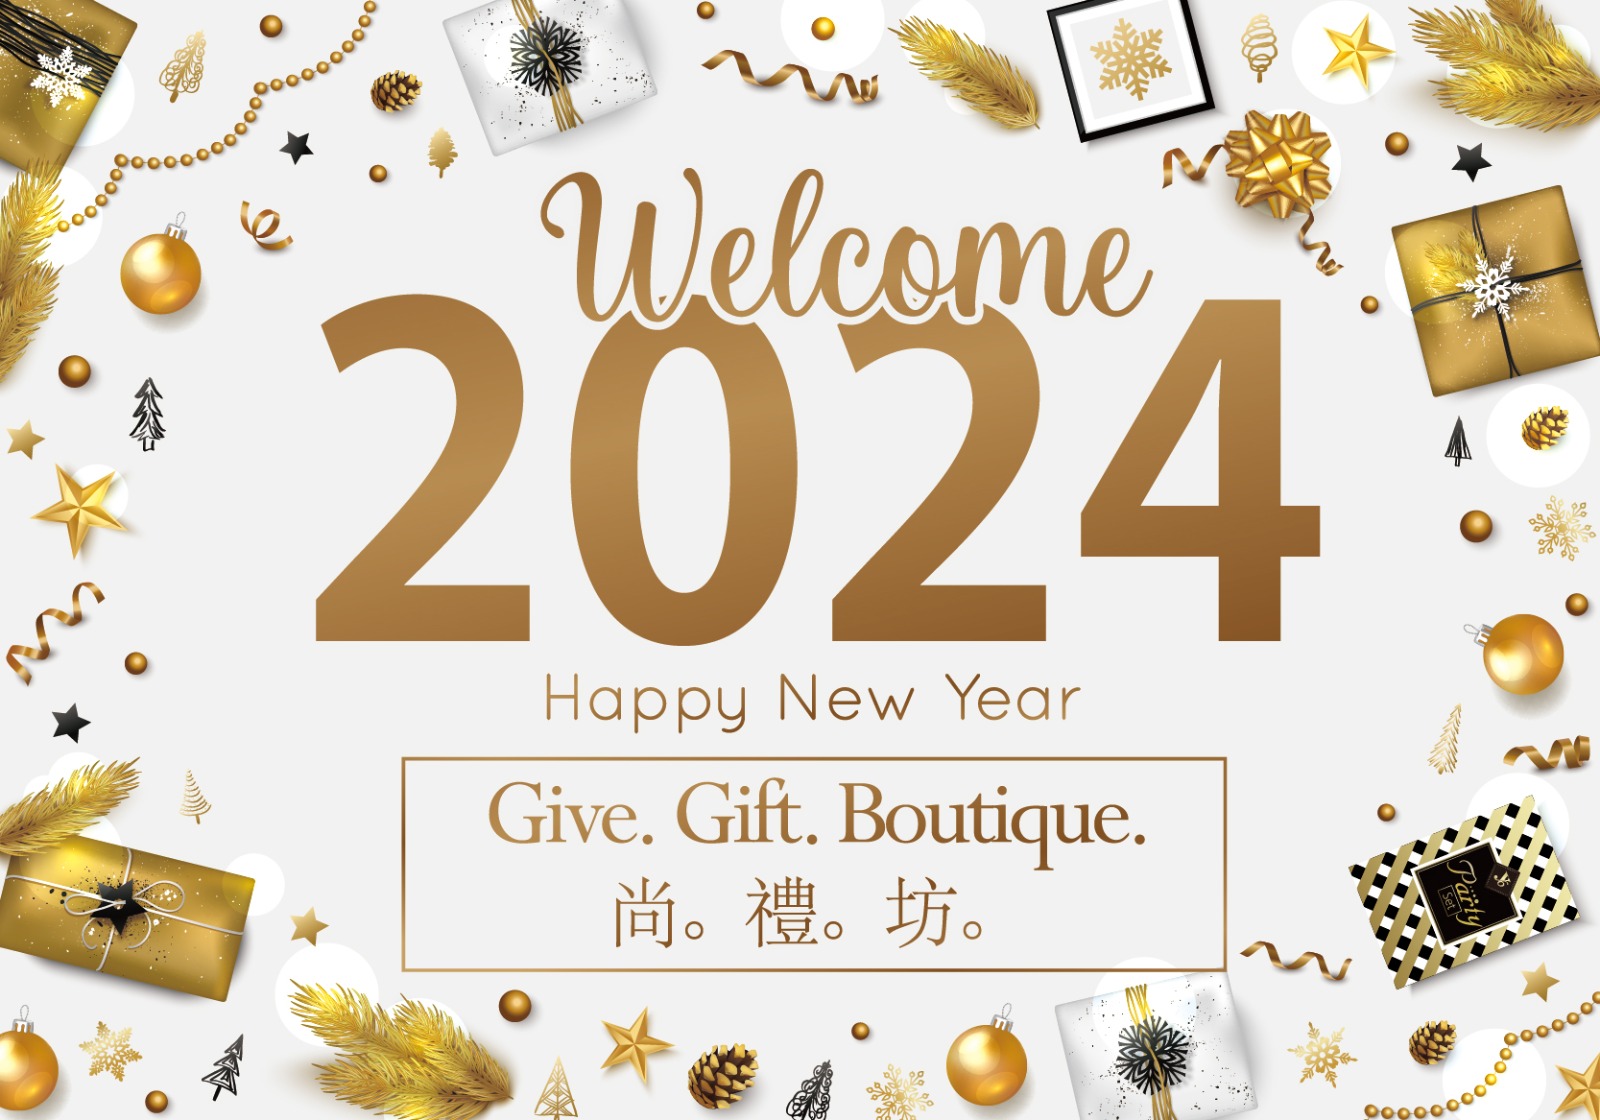 Happy New Year 2023: Wish your loved ones with gift | Zee Business